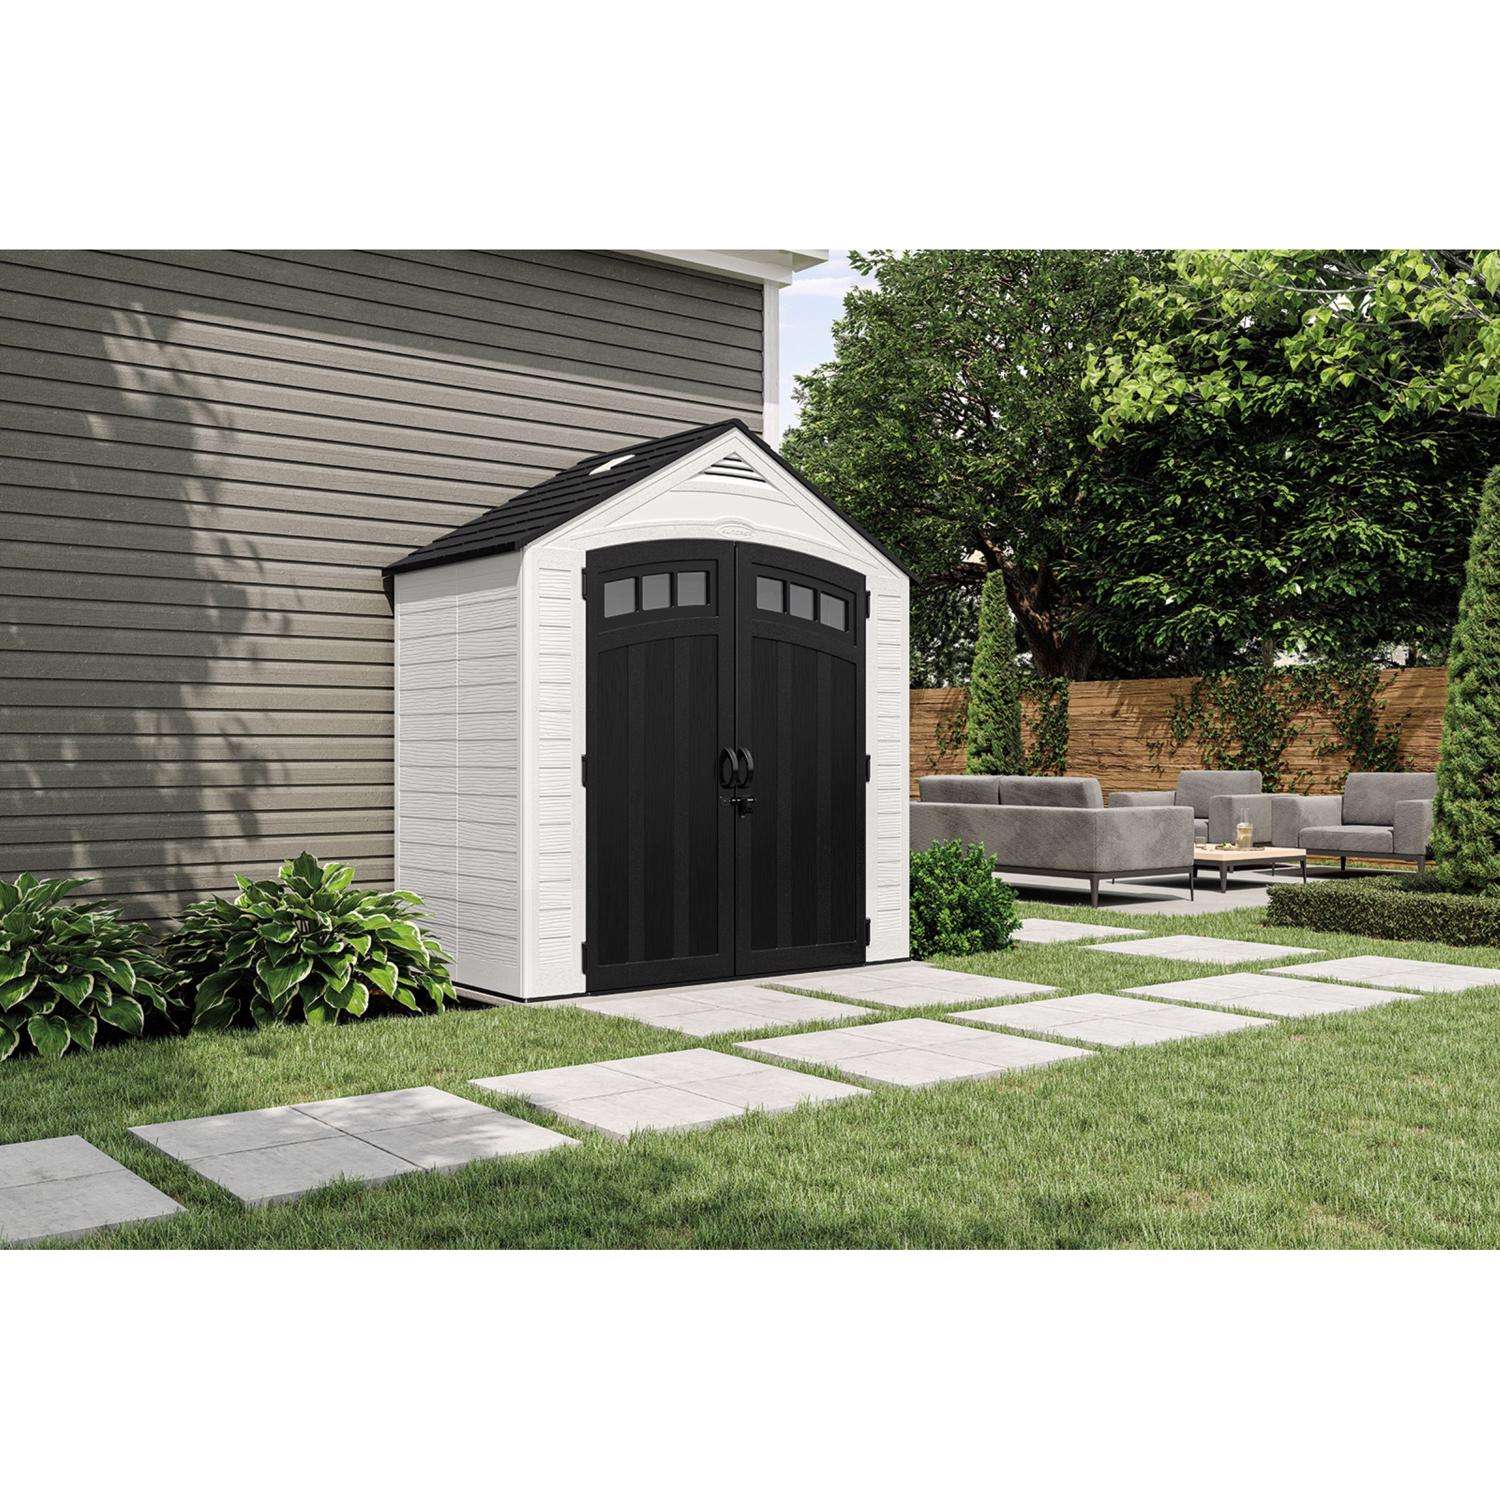 Suncast 7 ft. x 4 ft. Resin Standard Modern Storage Shed with